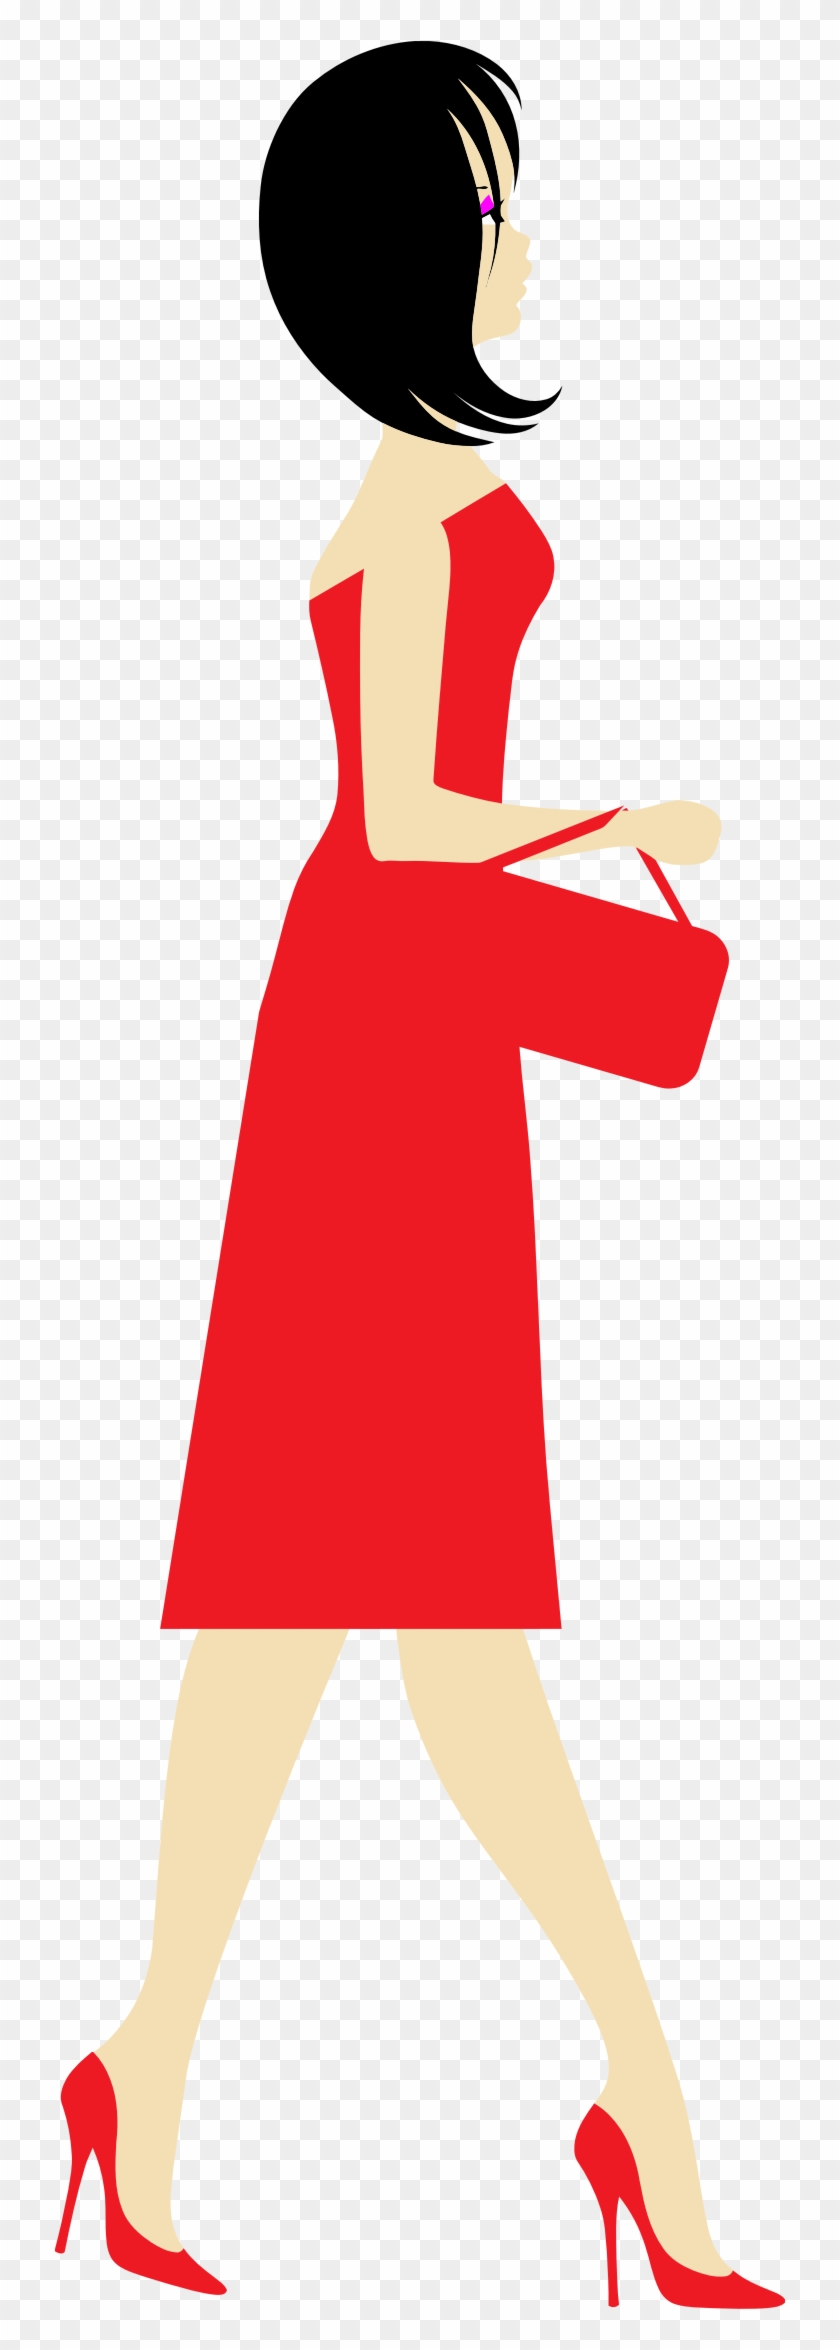 Lady In A Dress Clip Art - Png Download